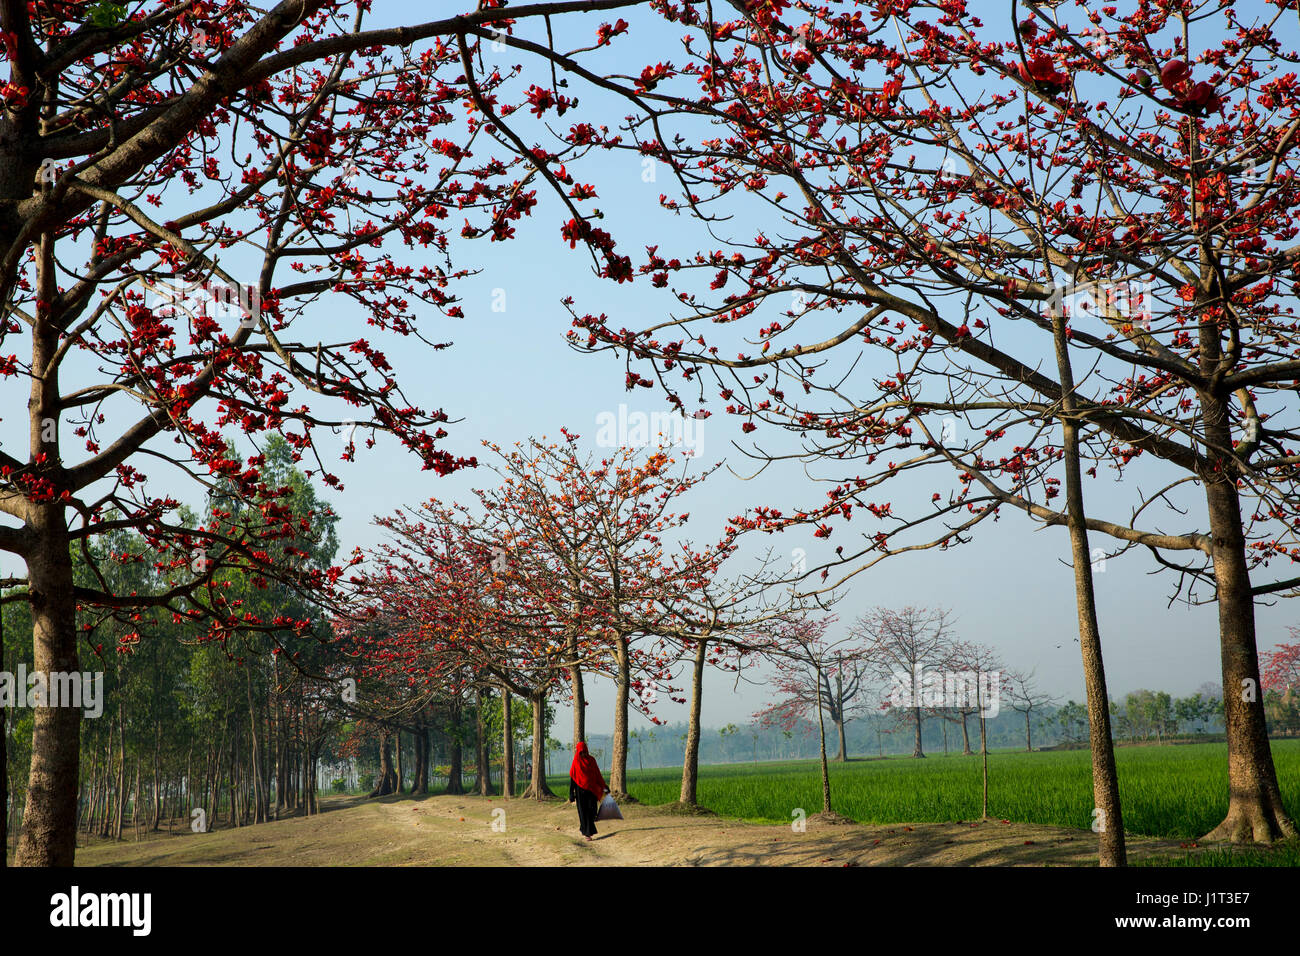 Red Silk Cotton flower trees also known as Bombax Ceiba, Shimul both sides of a road. Narsingdi, Bangladesh. Stock Photo